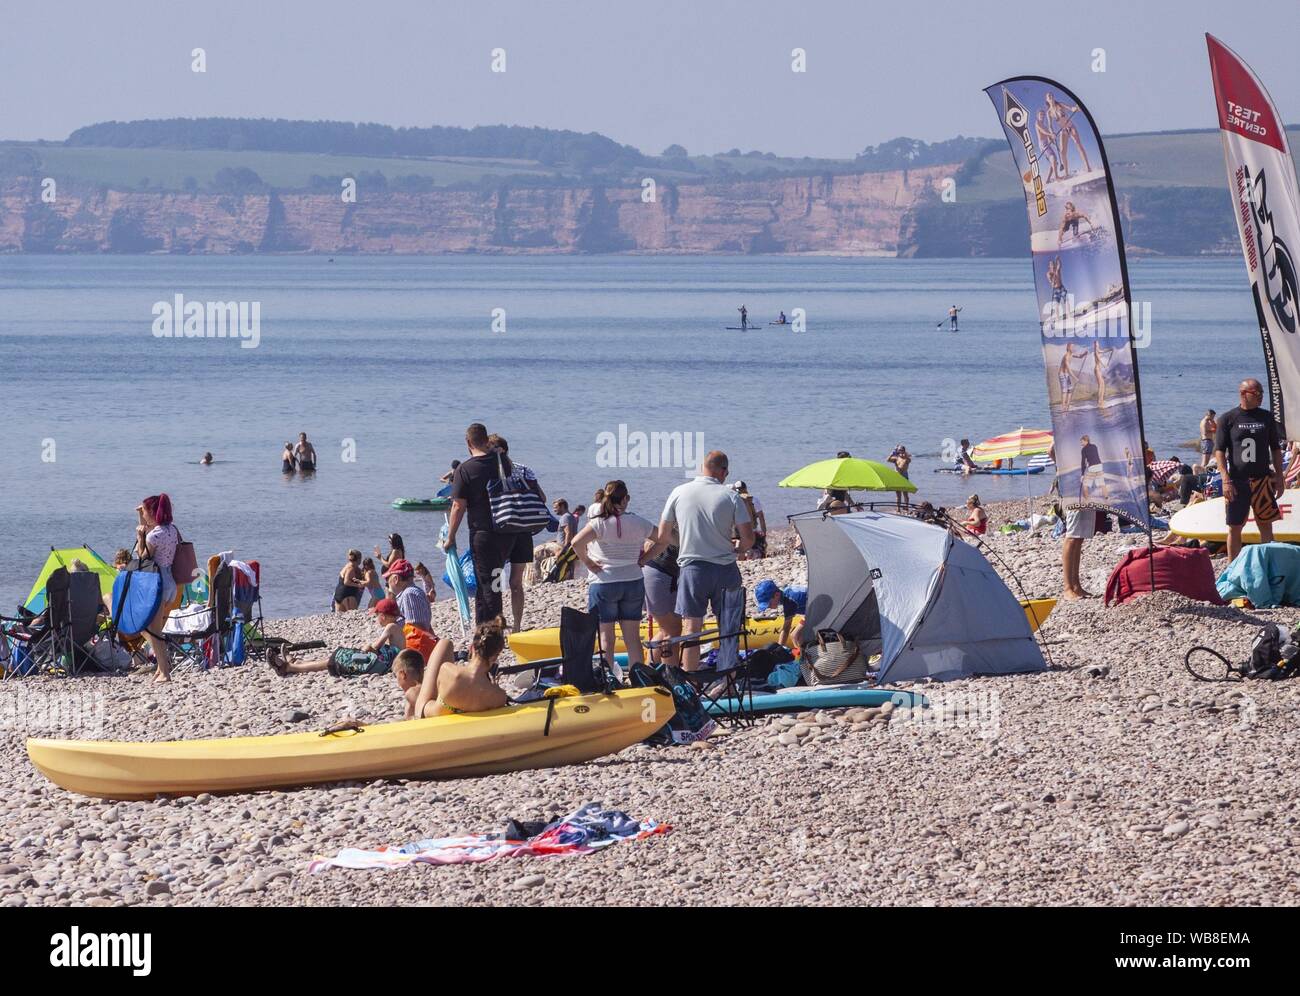 Sidmouth, Devon, 25th Aug 19 Bank holiday sunseekers take to the beach in scorching temperatures at Sidmouth, Devon. Tony Charnock/Alamy Live News Stock Photo